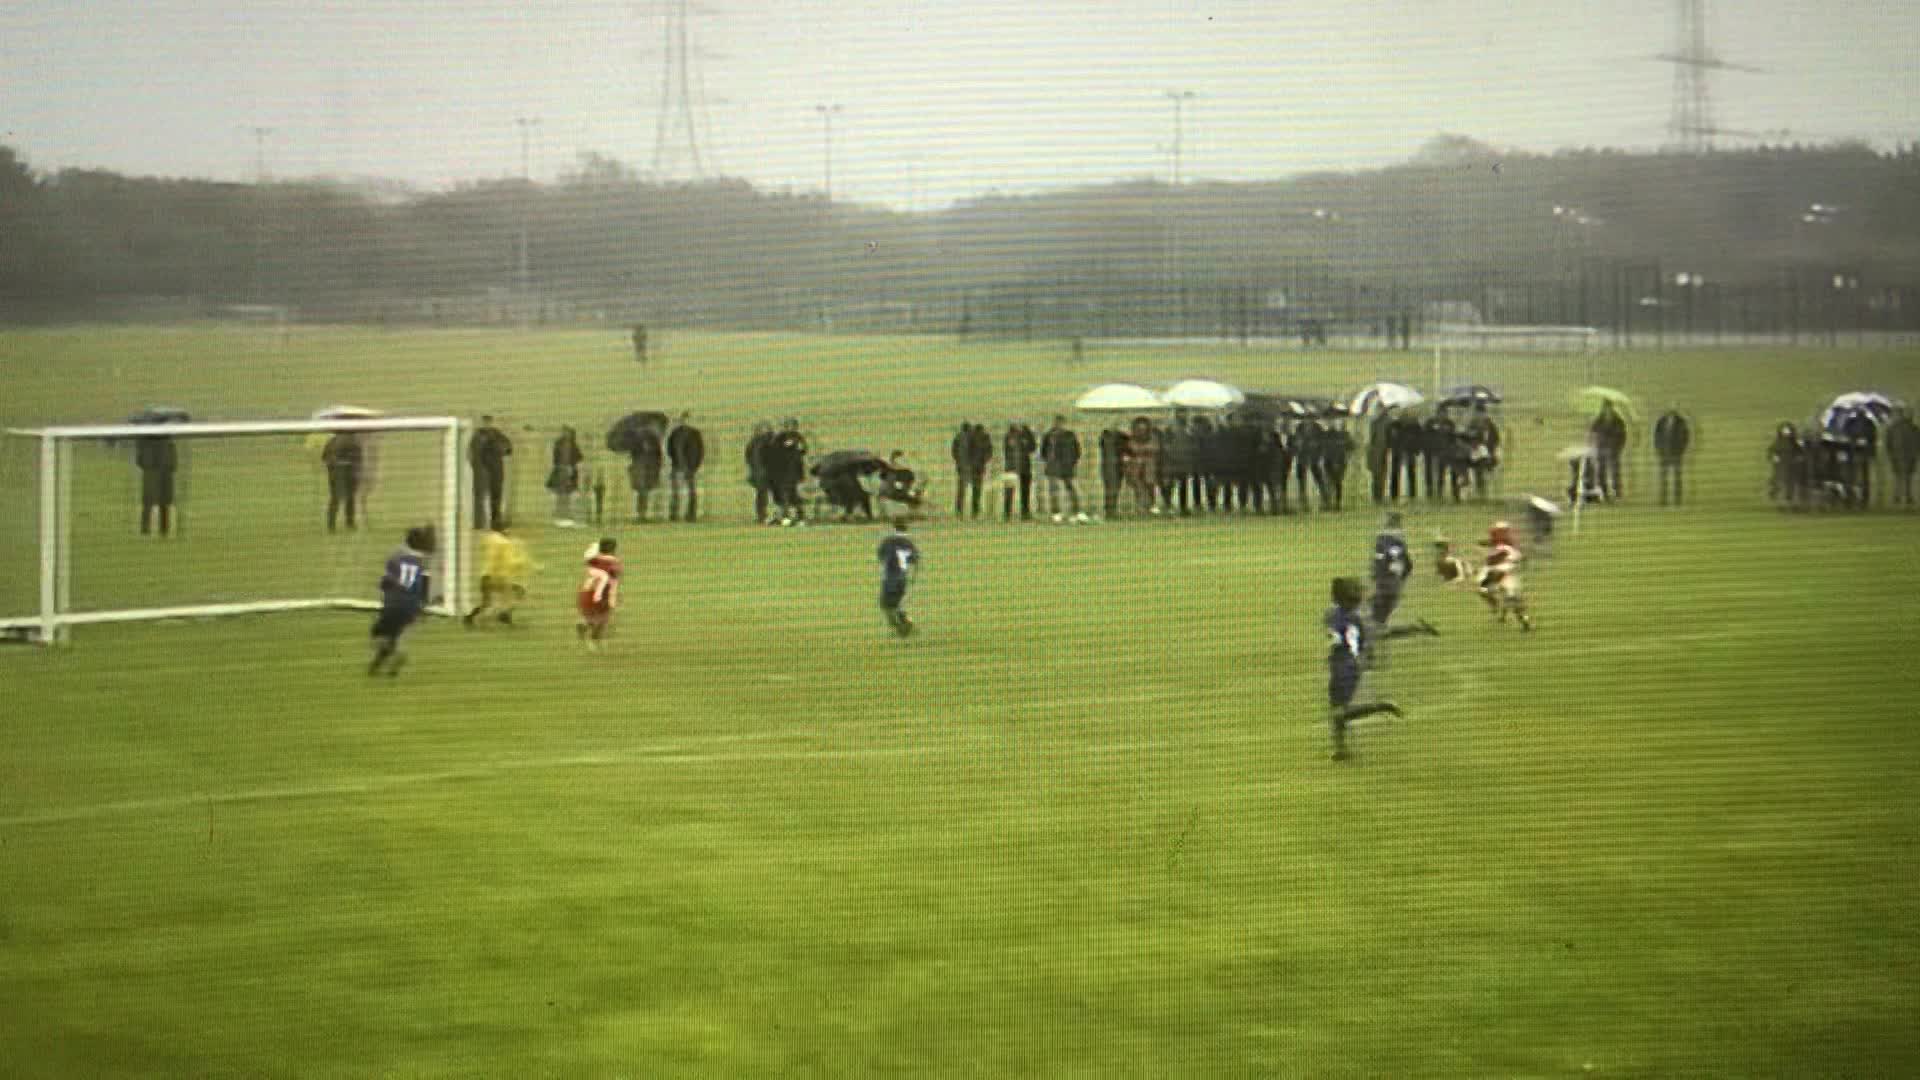 12 Year Old Brandon Wust Scoring against Walsall for Shrewsbury Town from Centre Back